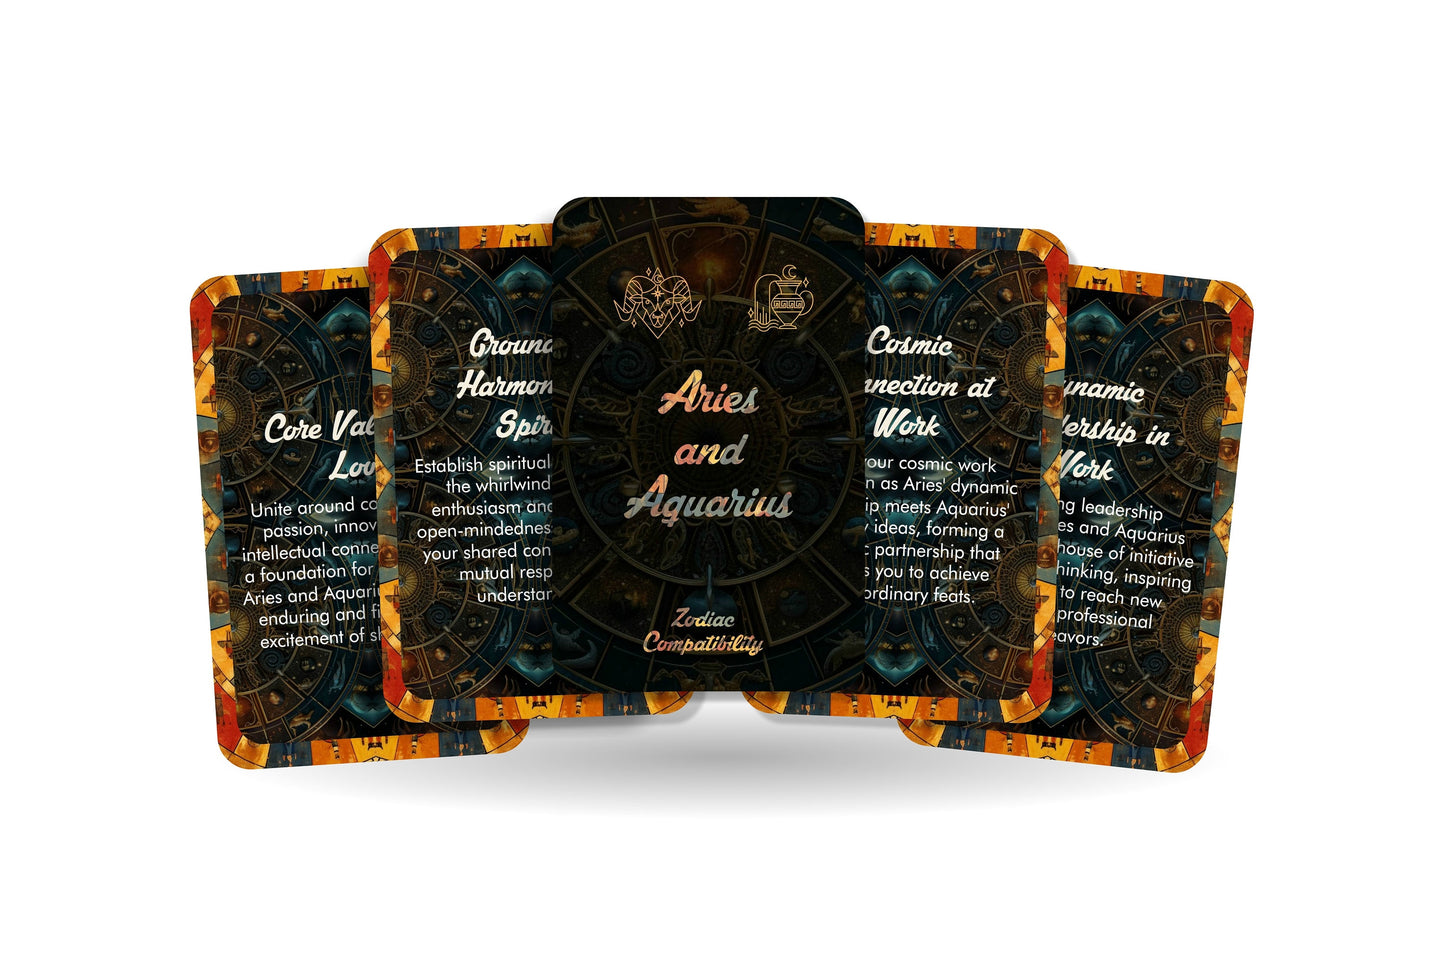 Aries and Aquarius - Zodiac Compatibility - Divination tools - Oracle cards - Star Sign Compatibility - Horoscope Compatibility Cards